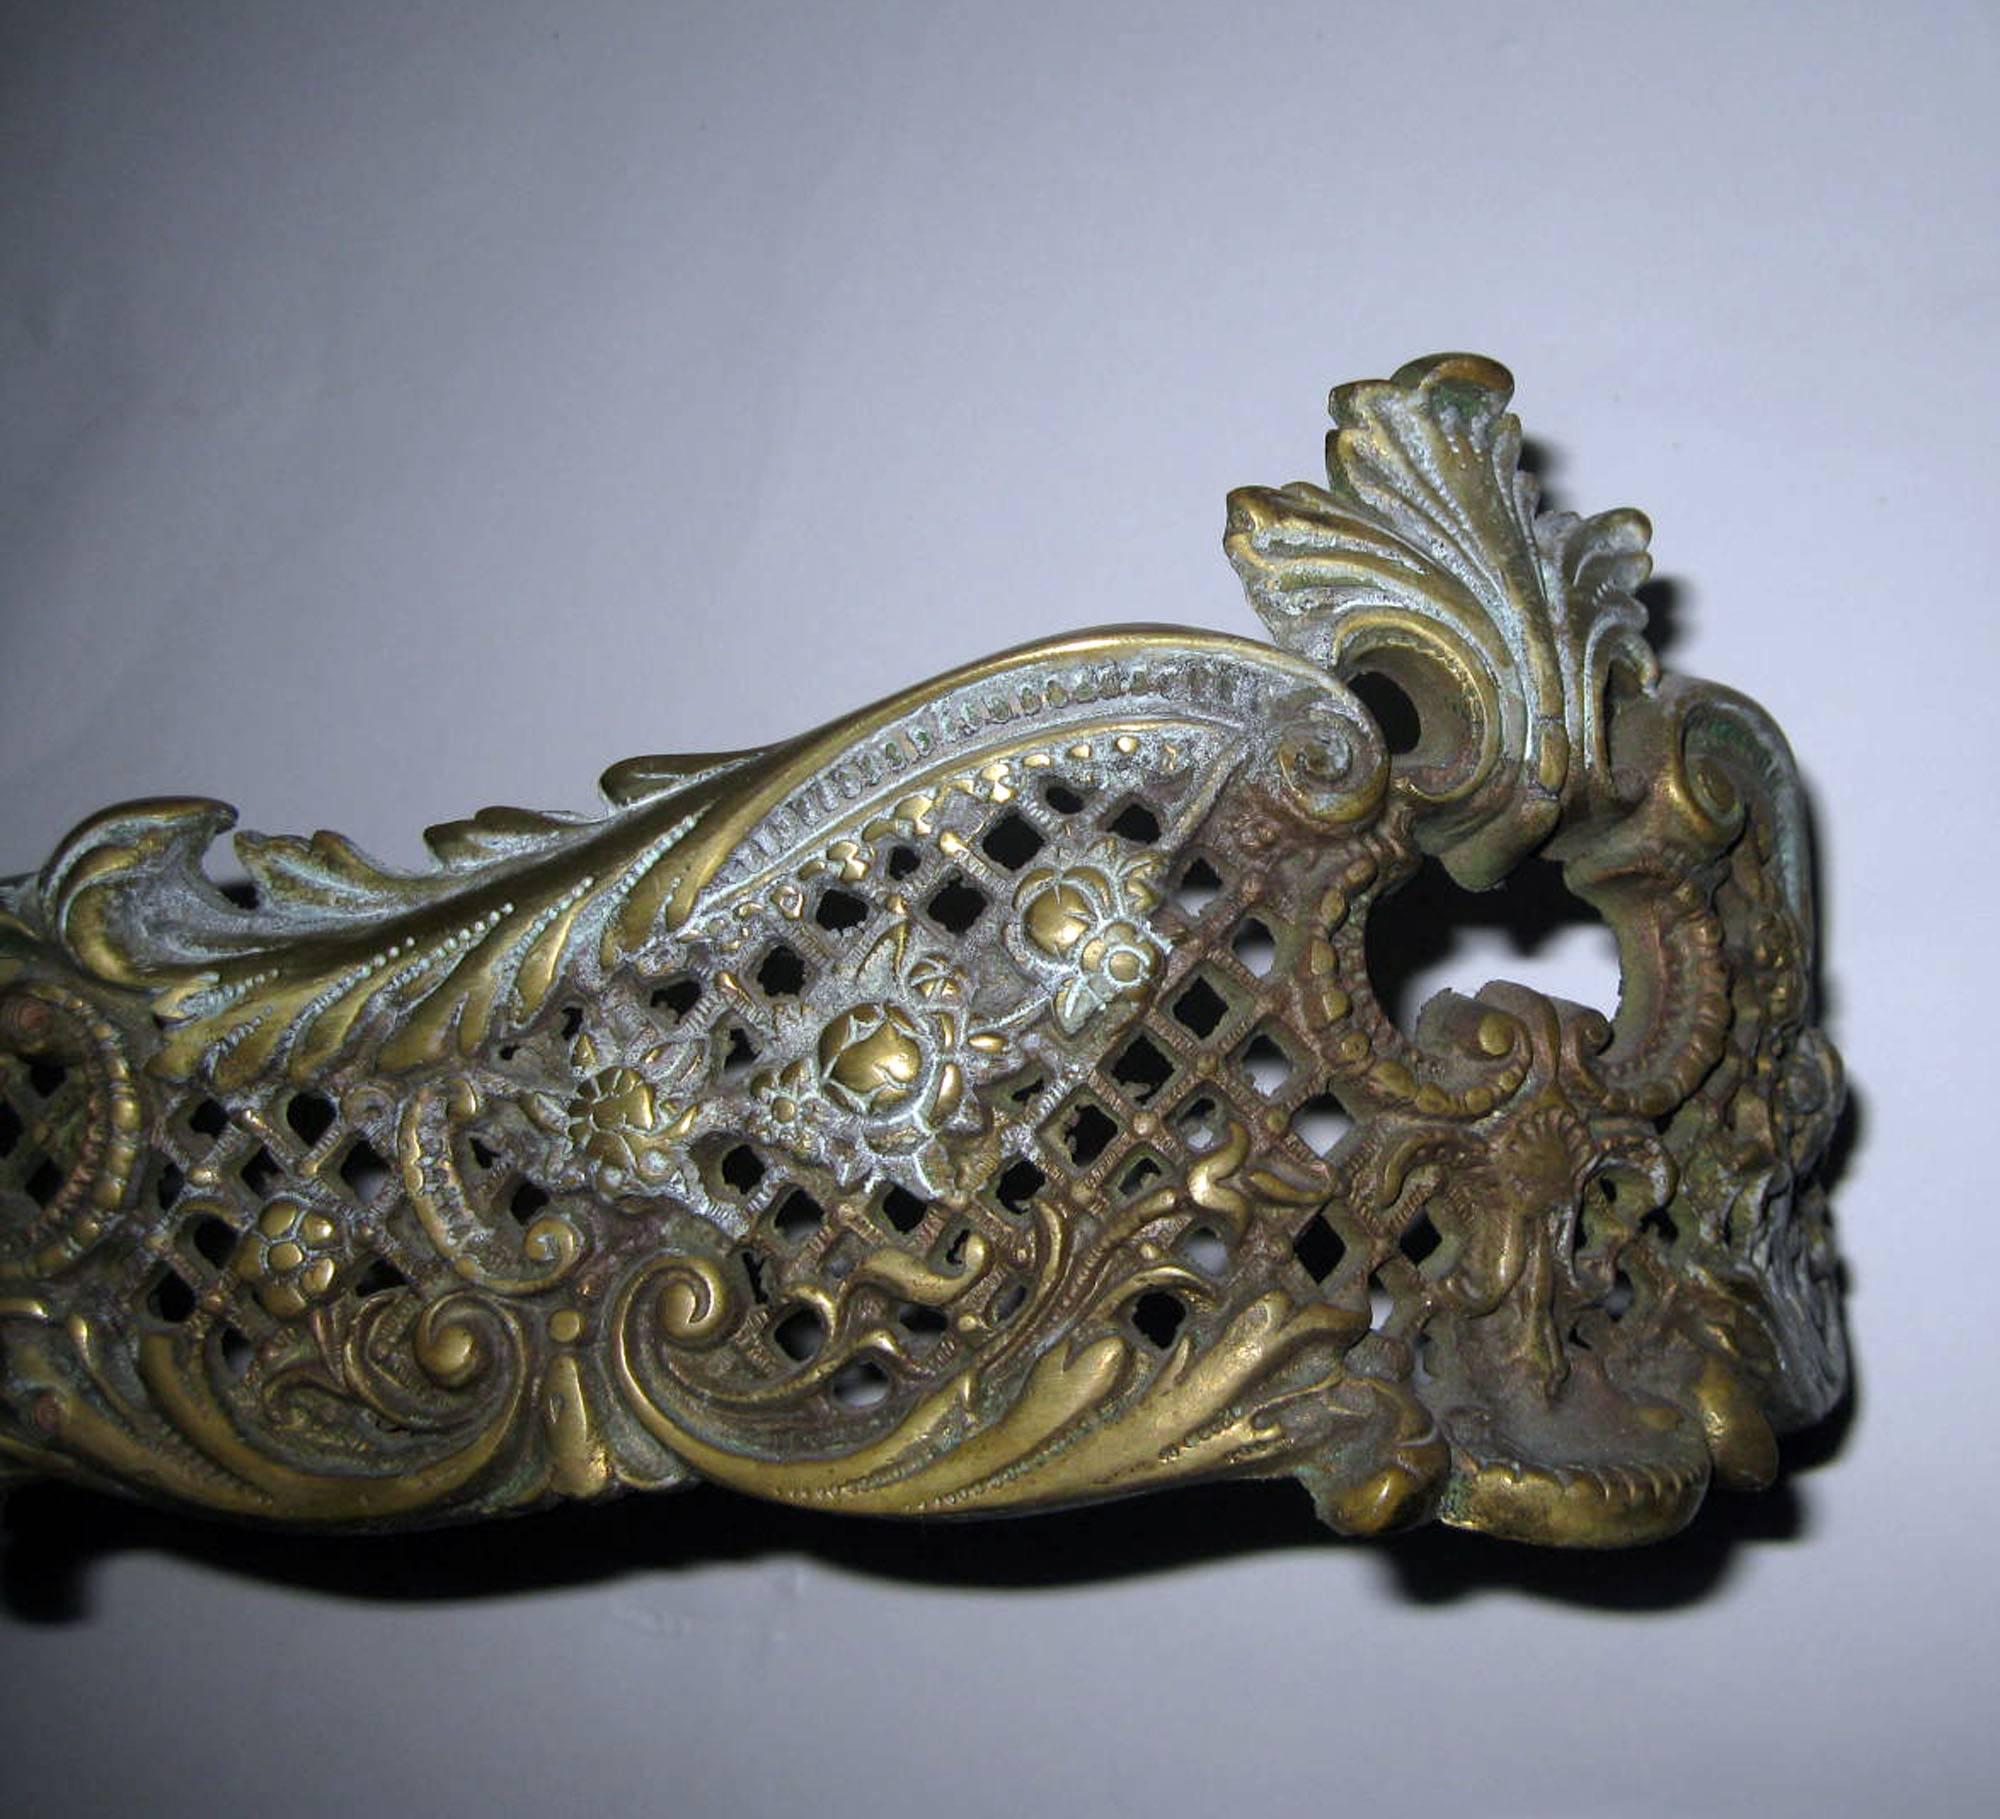 Very ornate bronze fireplace fender in the Rococo style. Lots of detail.